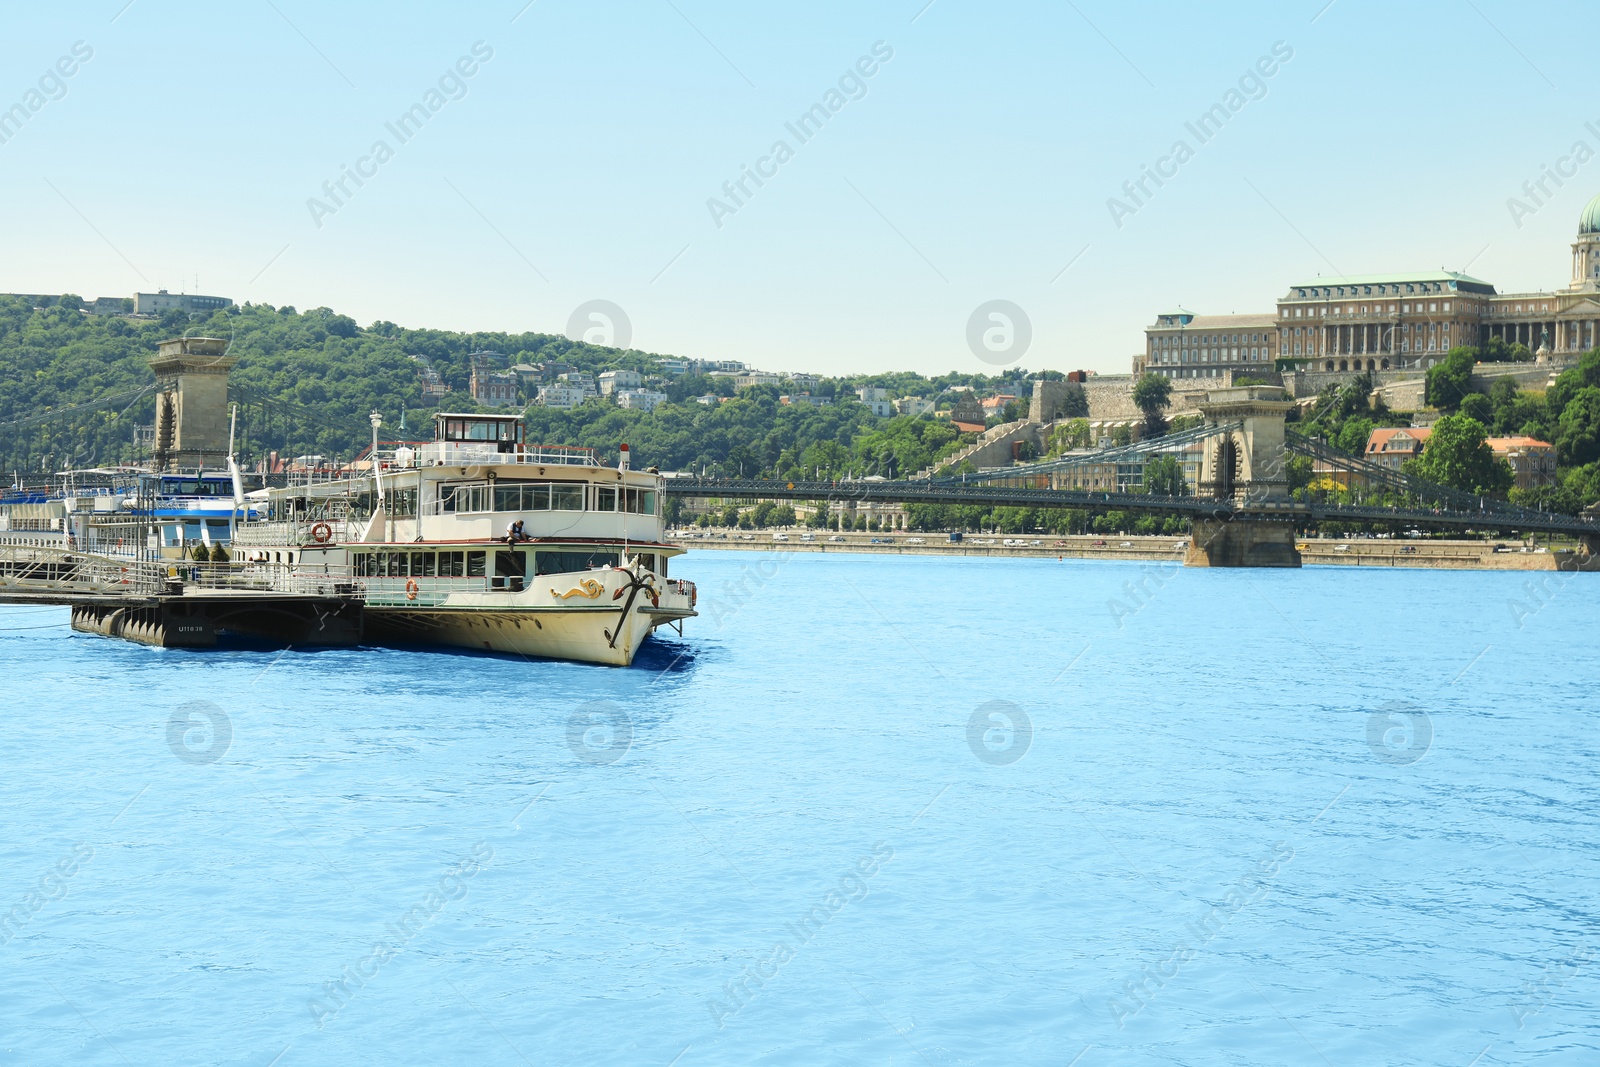 Photo of BUDAPEST, HUNGARY - JUNE 18, 2019: Beautiful view with Buda Castle, Szechenyi Chain Bridge and tour boat on Danube river